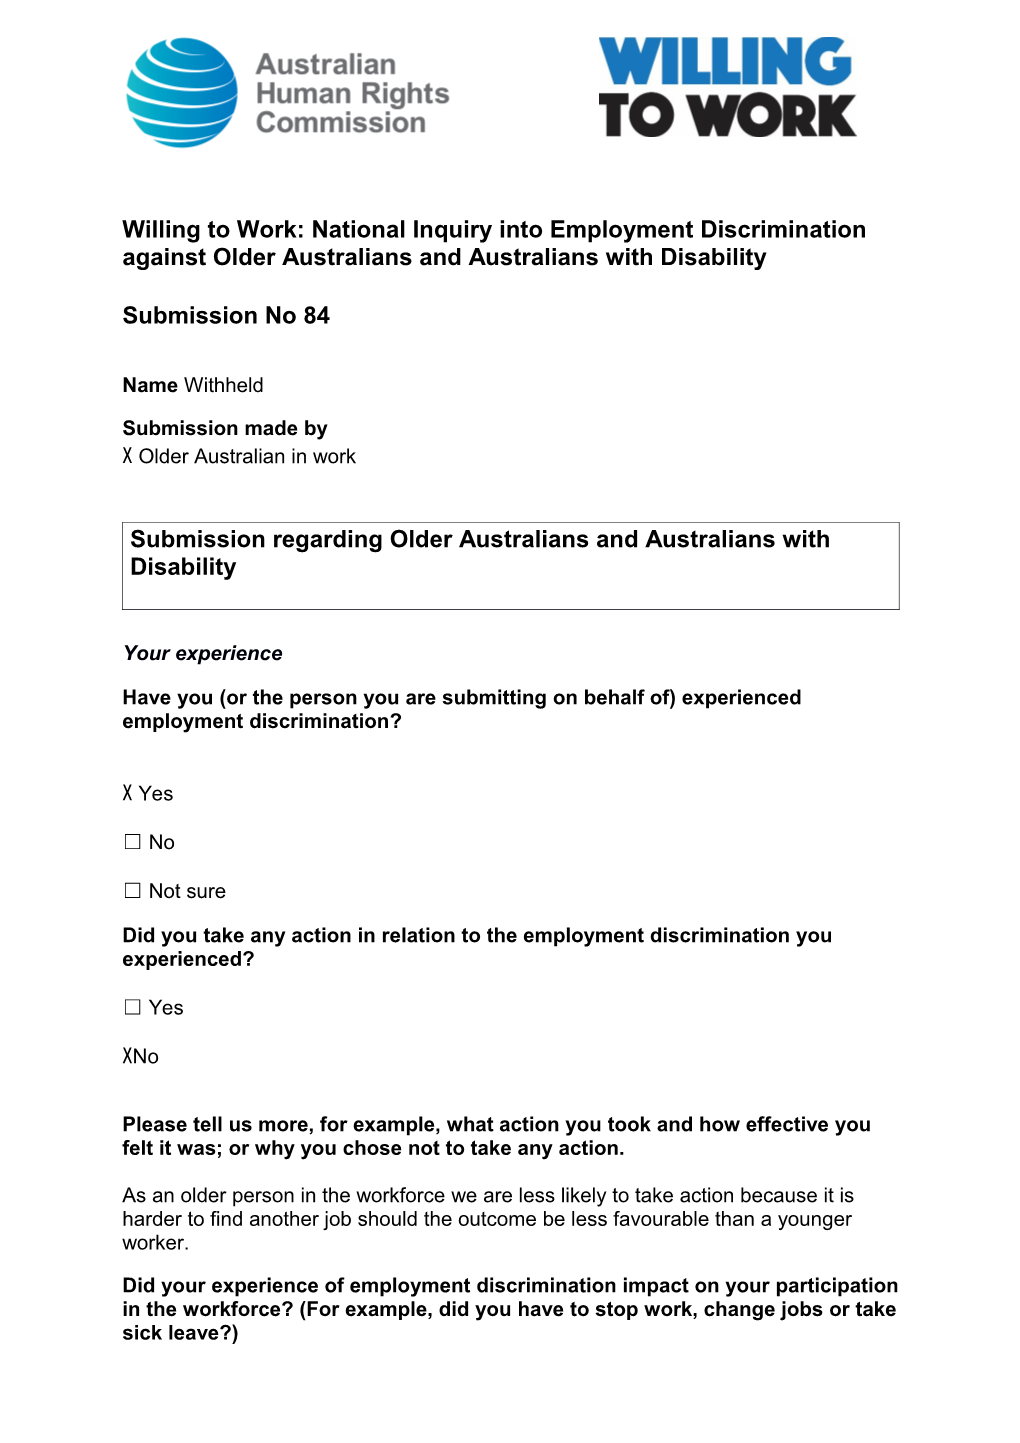 Submission Regarding Older Australians Andaustralians with Disability